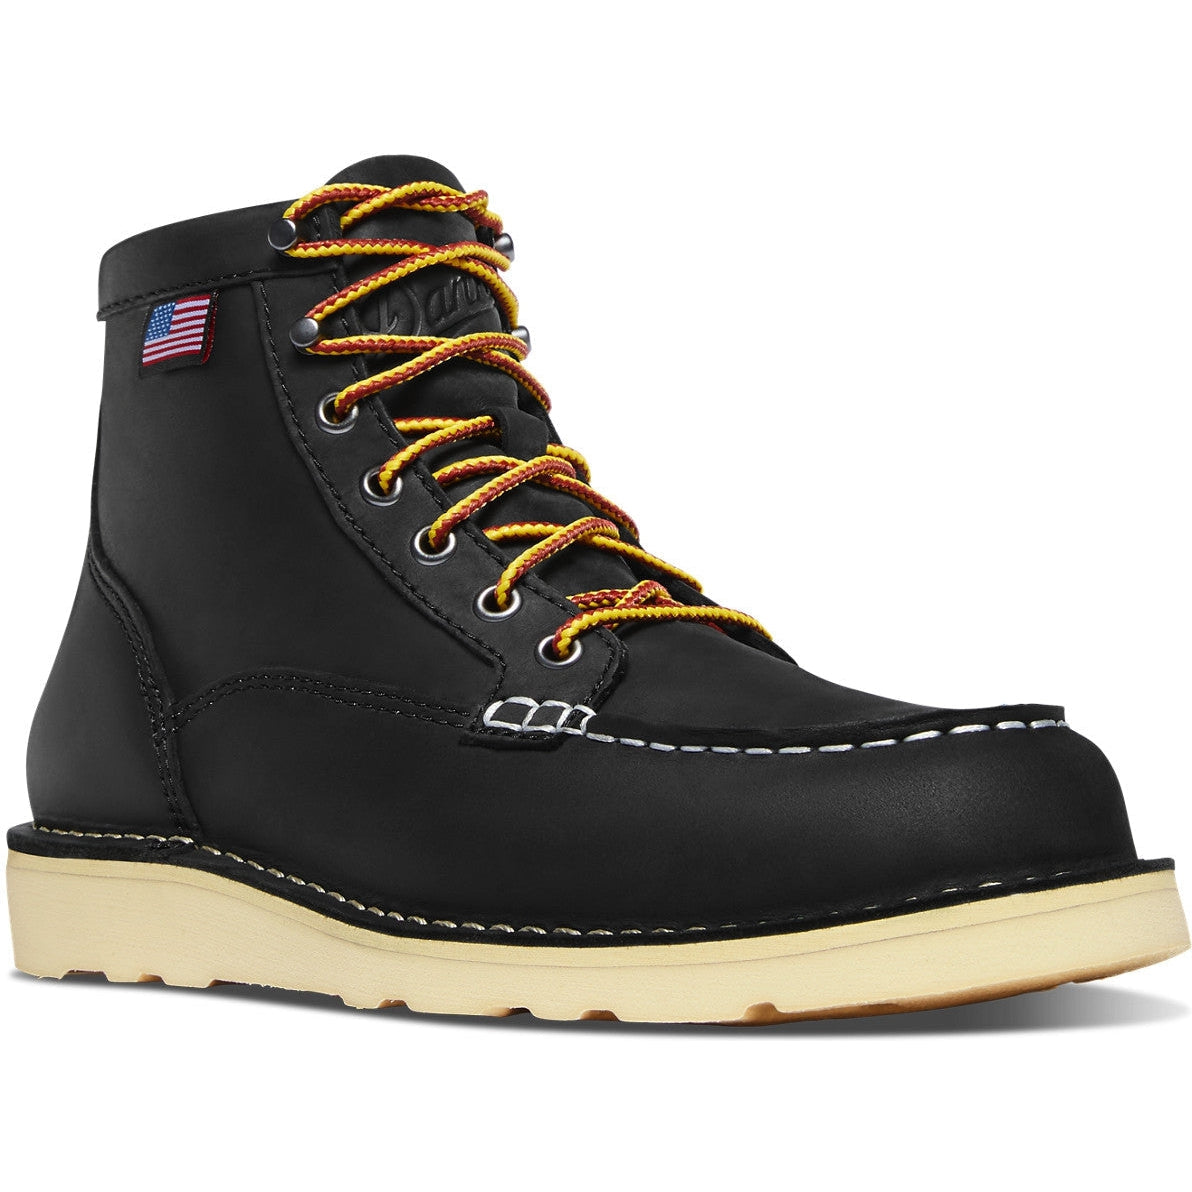 Women’s Work Boots & Shoes | Overlook Boots – Page 2